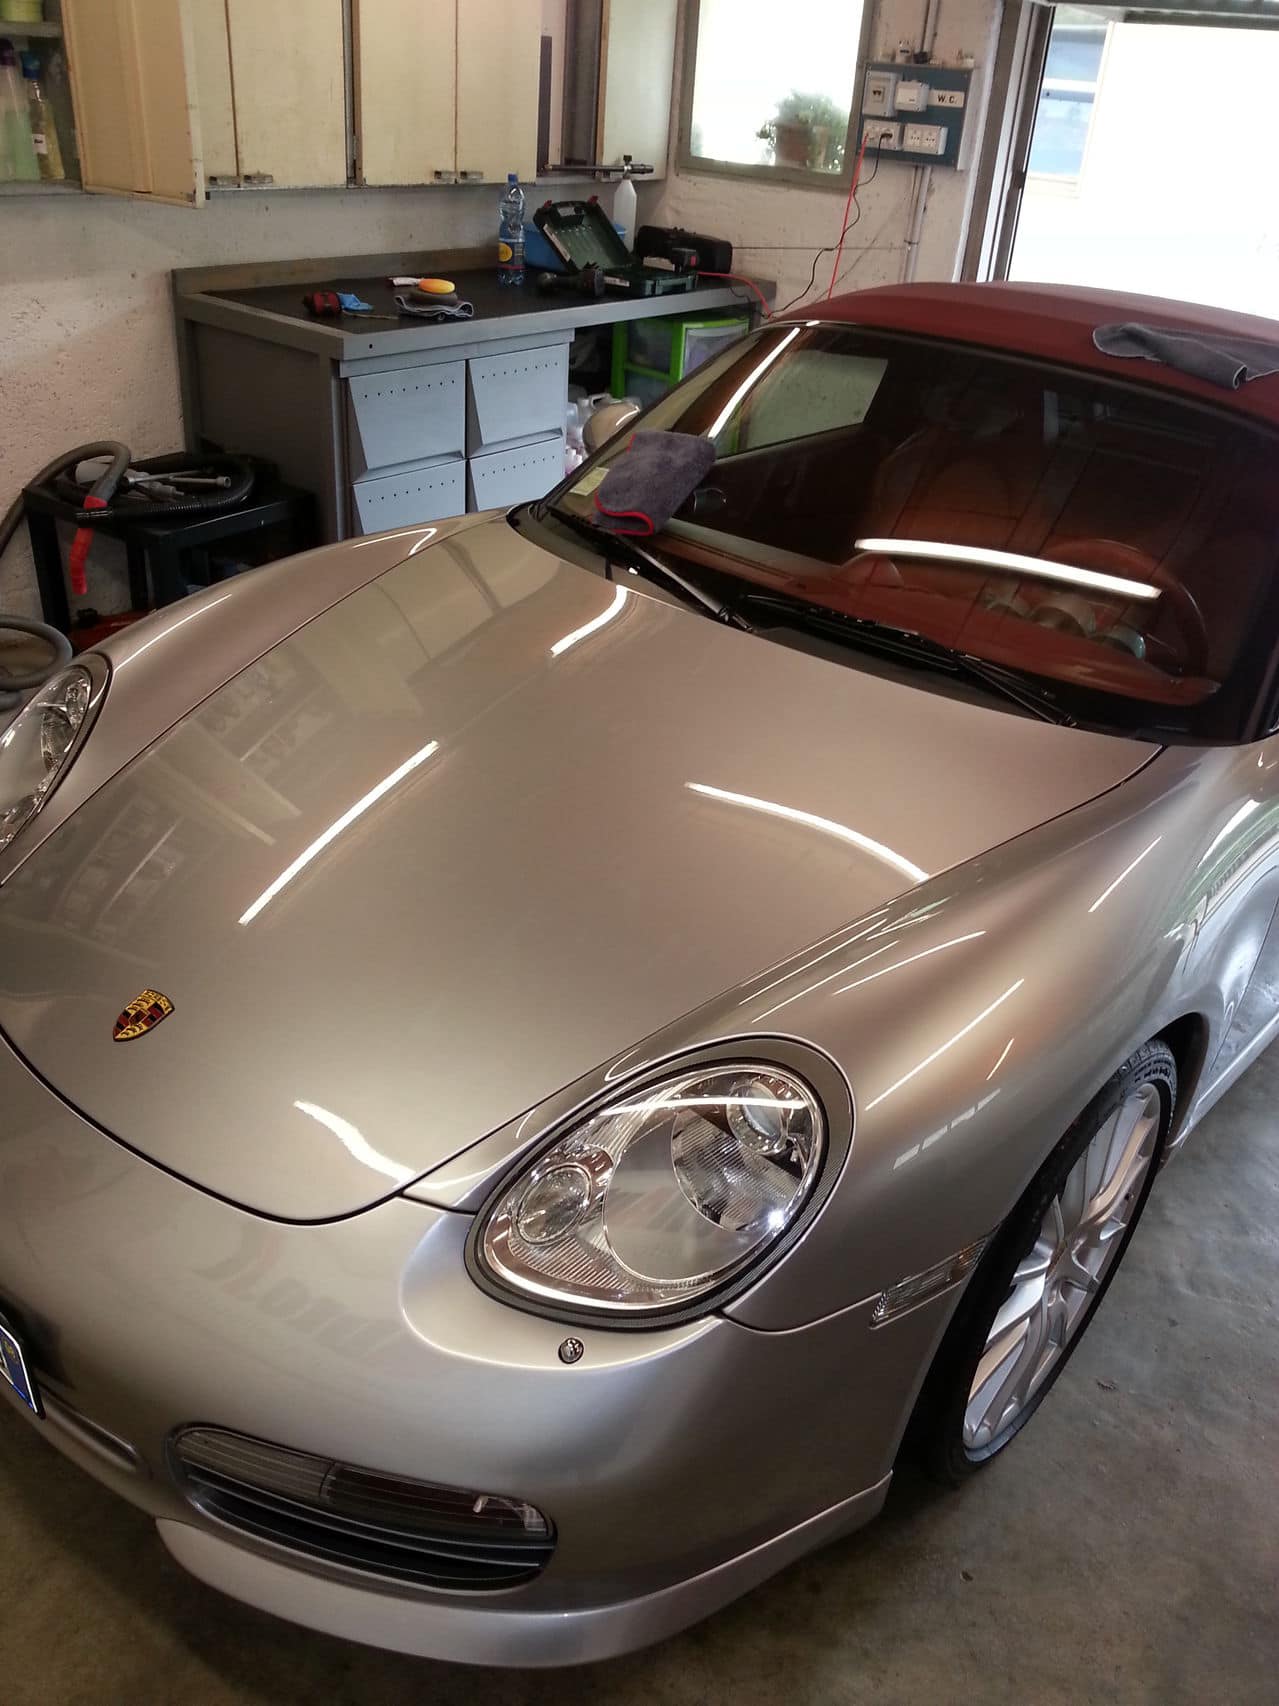 Porsche Boxster RS60 by MaX-XxX detailing 20140710_152330